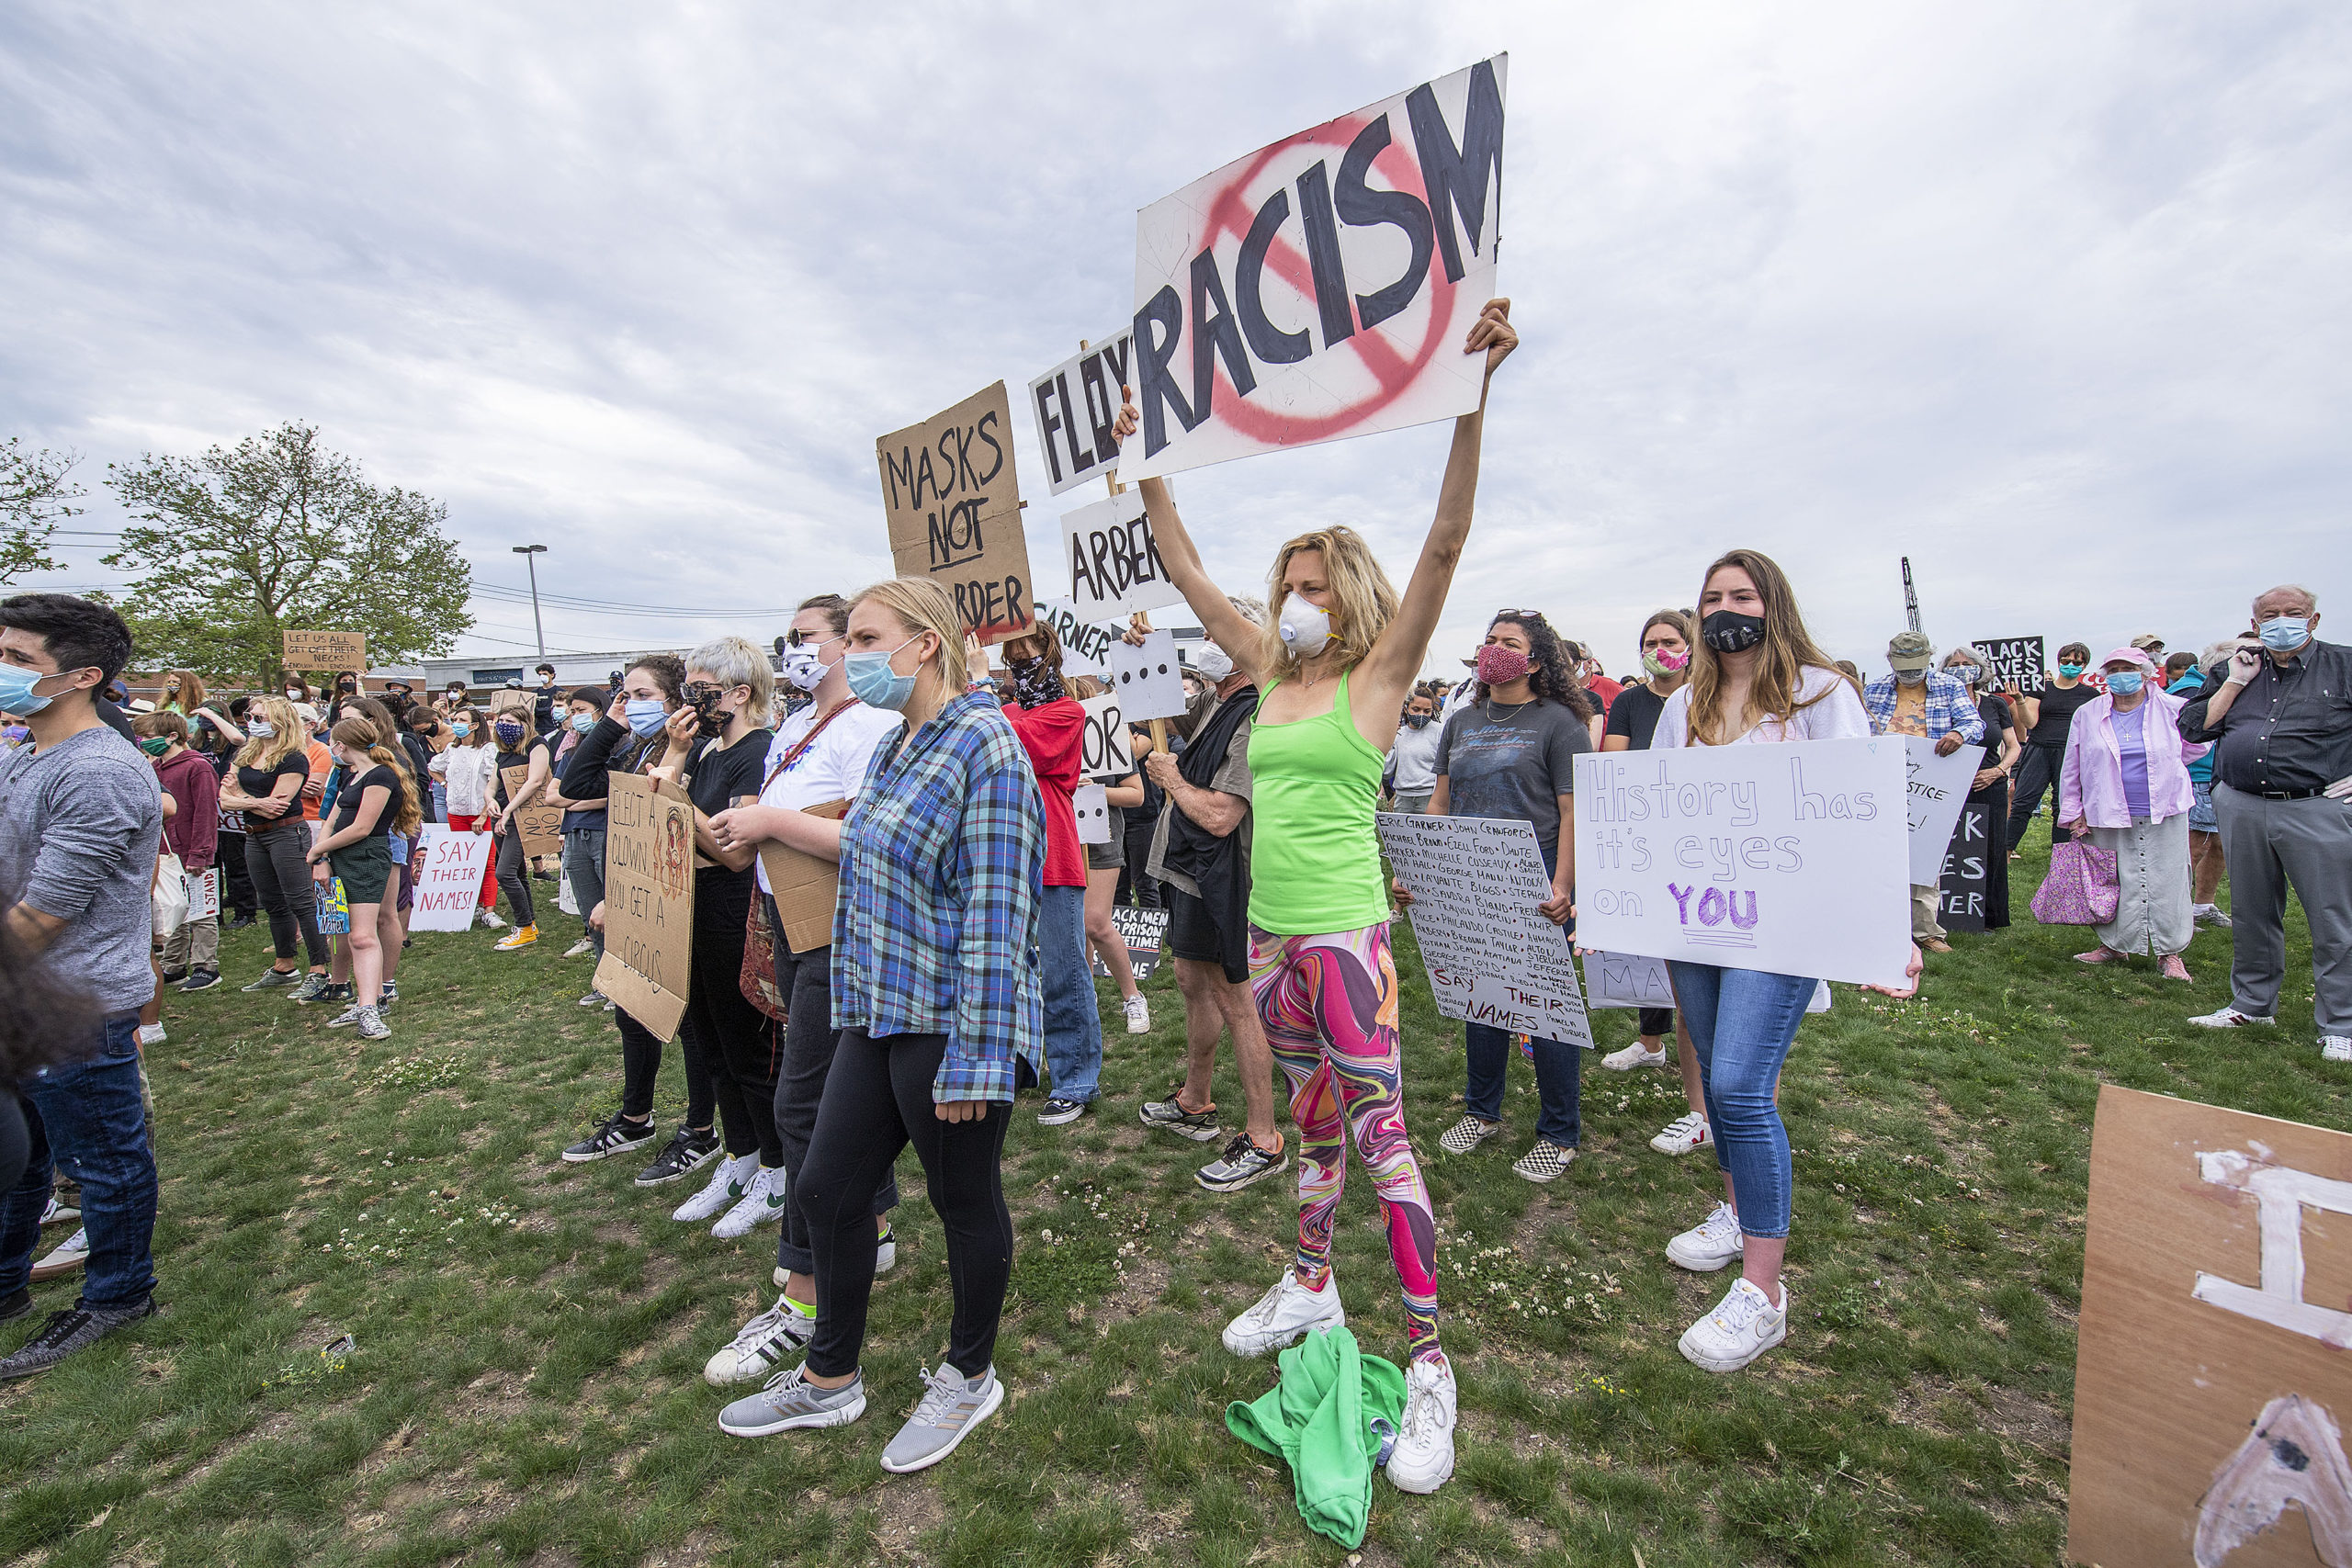 Hundreds of people participated in a protest on Friday in Sag Harbor against police brutality and racism. MICHAEL HELLER